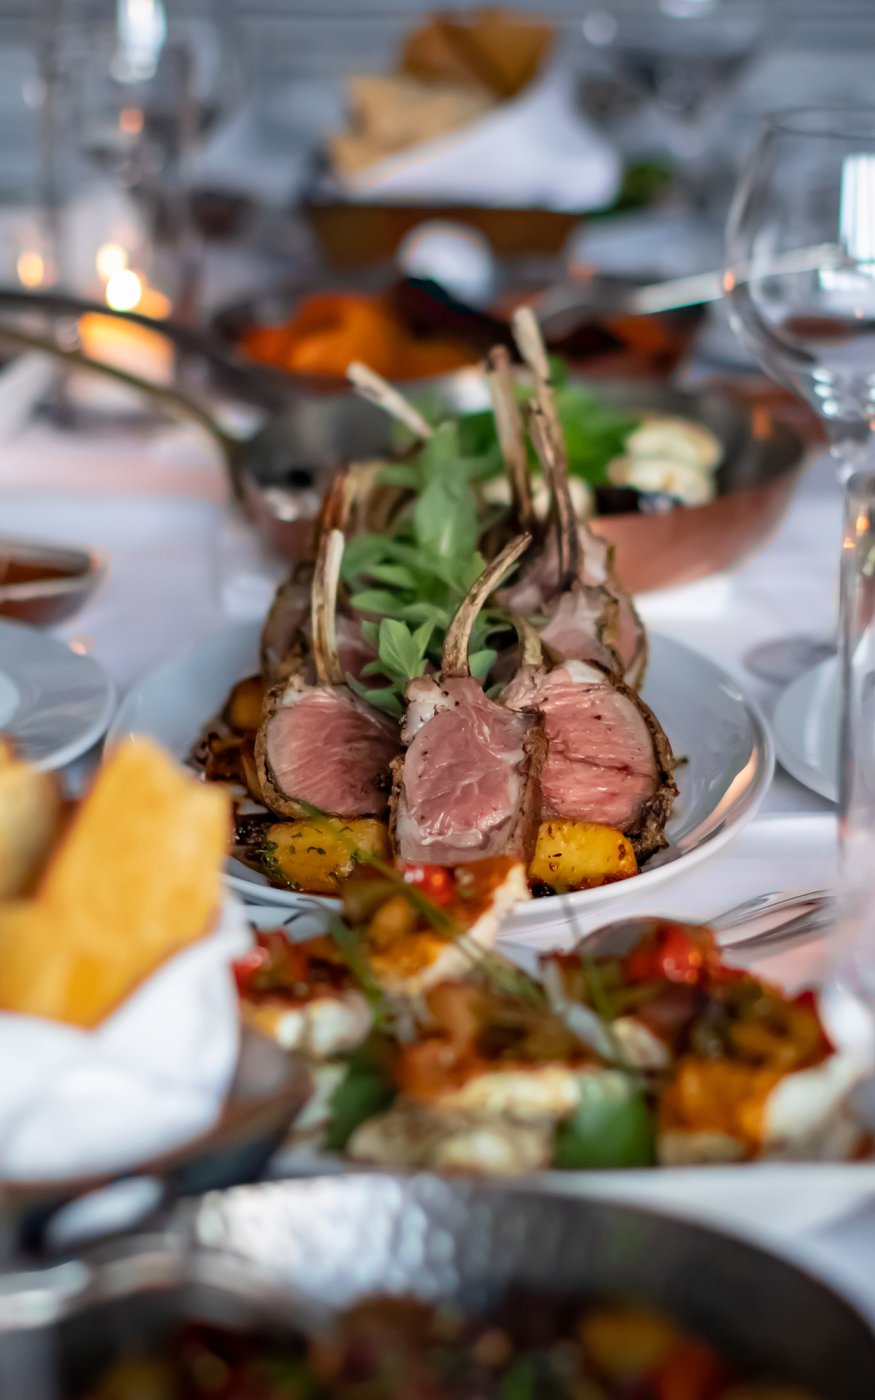 Succulent lamb chops with bone resented alongside vegetables in a gold trimmed white bowl